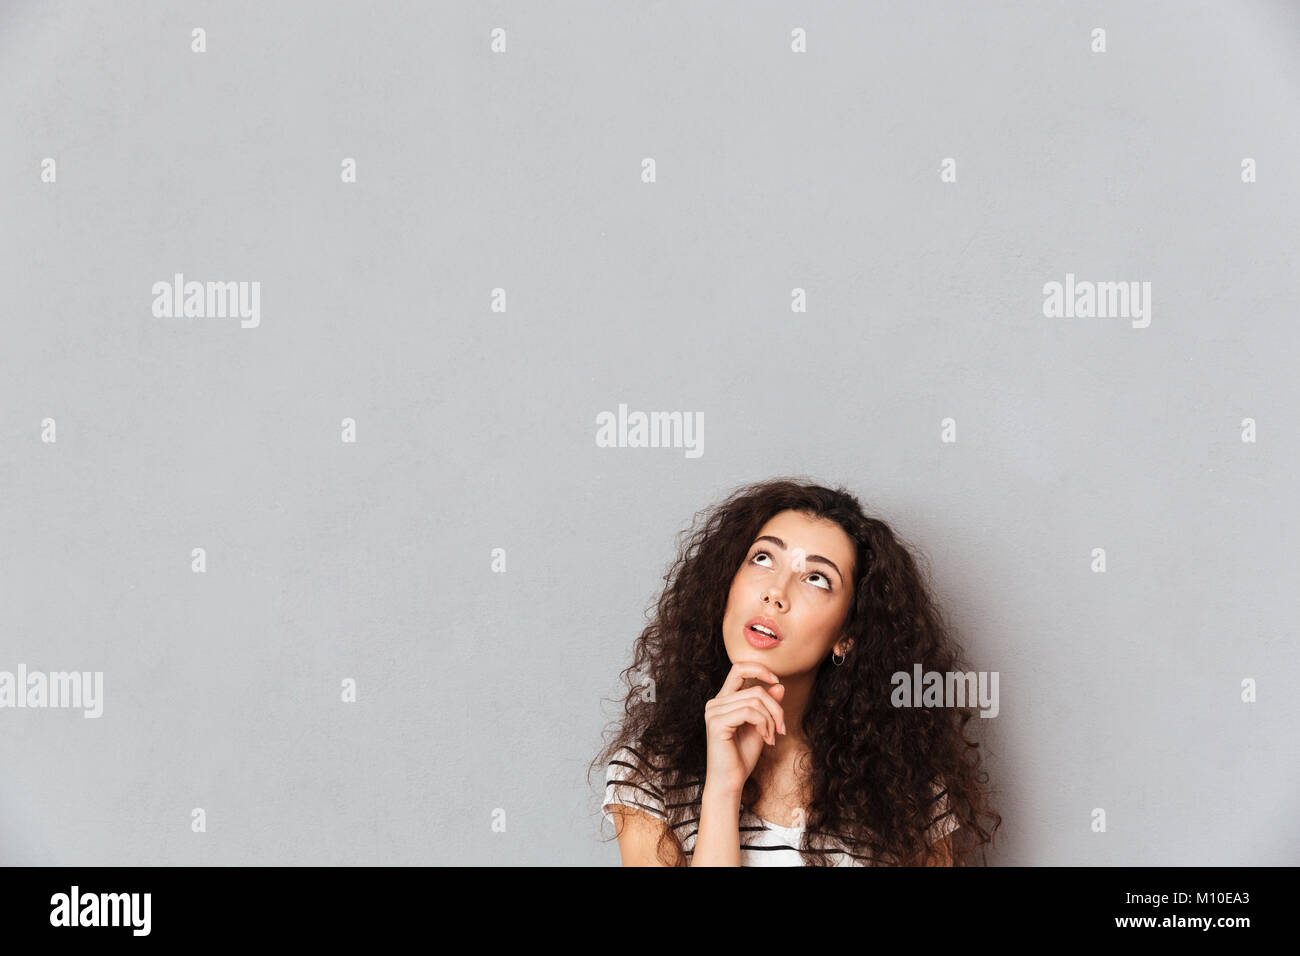 Concentrated young woman with shaggy hair touching her chin with face upward, and thinking or dreaming over grey background in studio Stock Photo